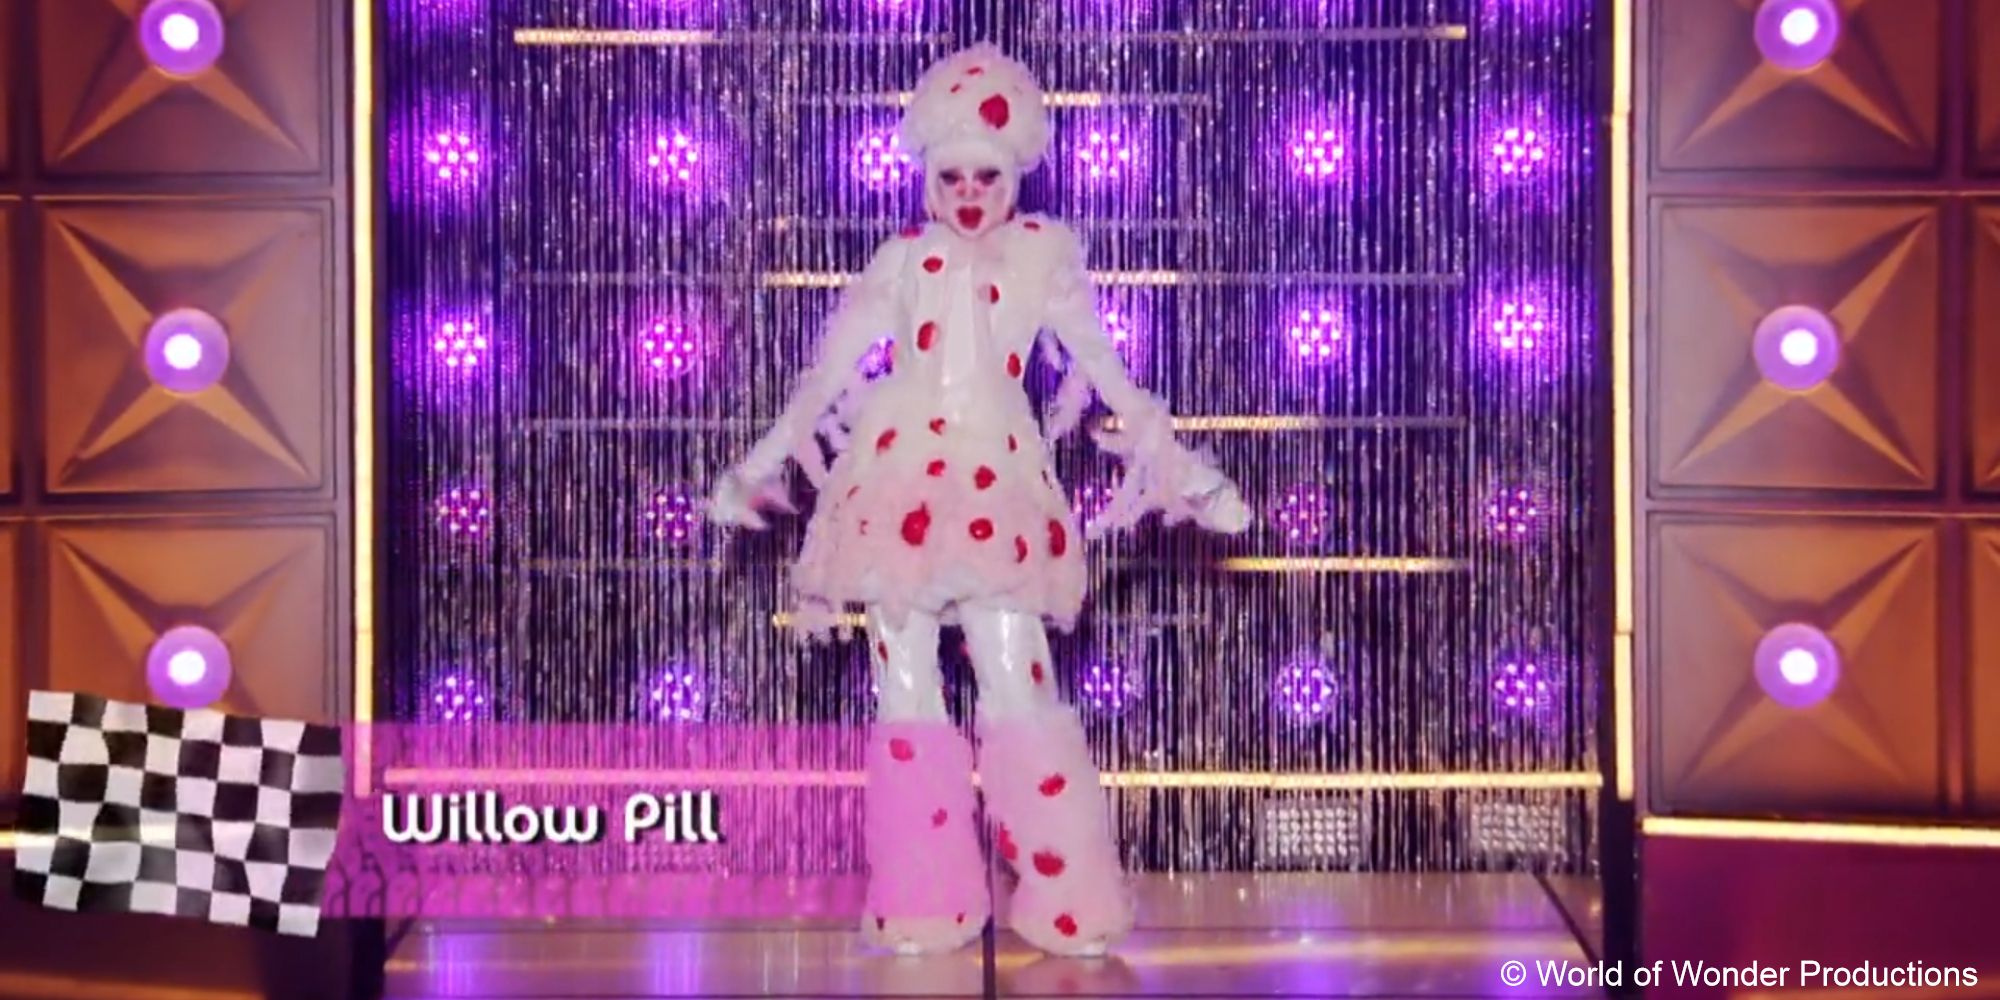 A still of drag queen Willow Pill wearing a red and white bleeding tooth fungus-inspired outfit